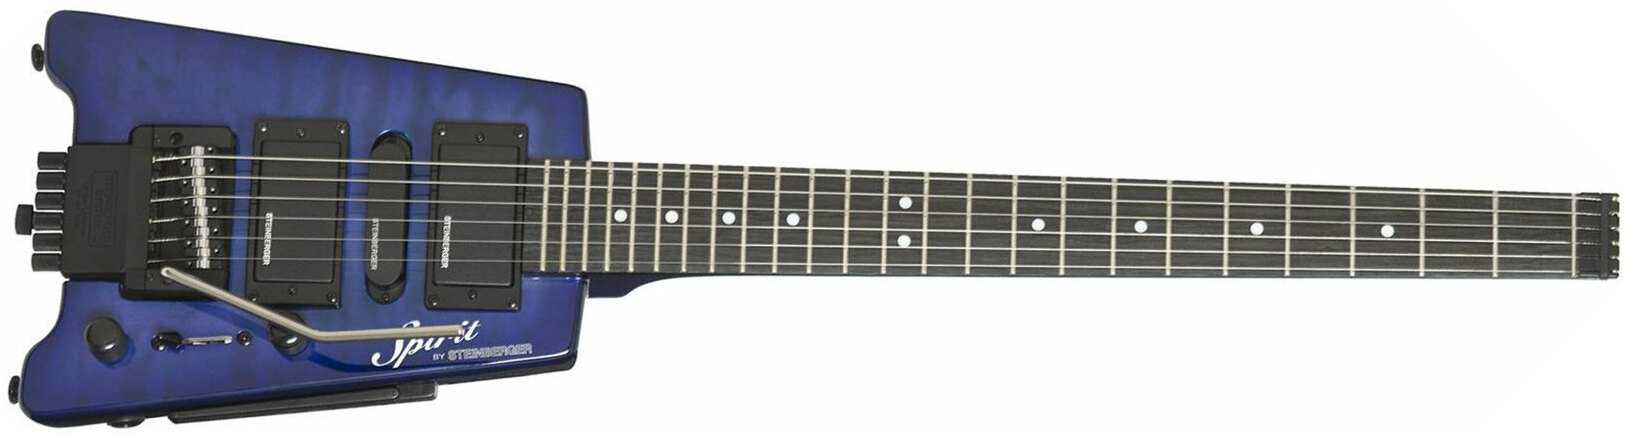 Steinberger Gt-pro Deluxe Quilt Top Outfit Hsh Trem Rw +housse - Trans Blue - Travel & mini electric guitar - Main picture